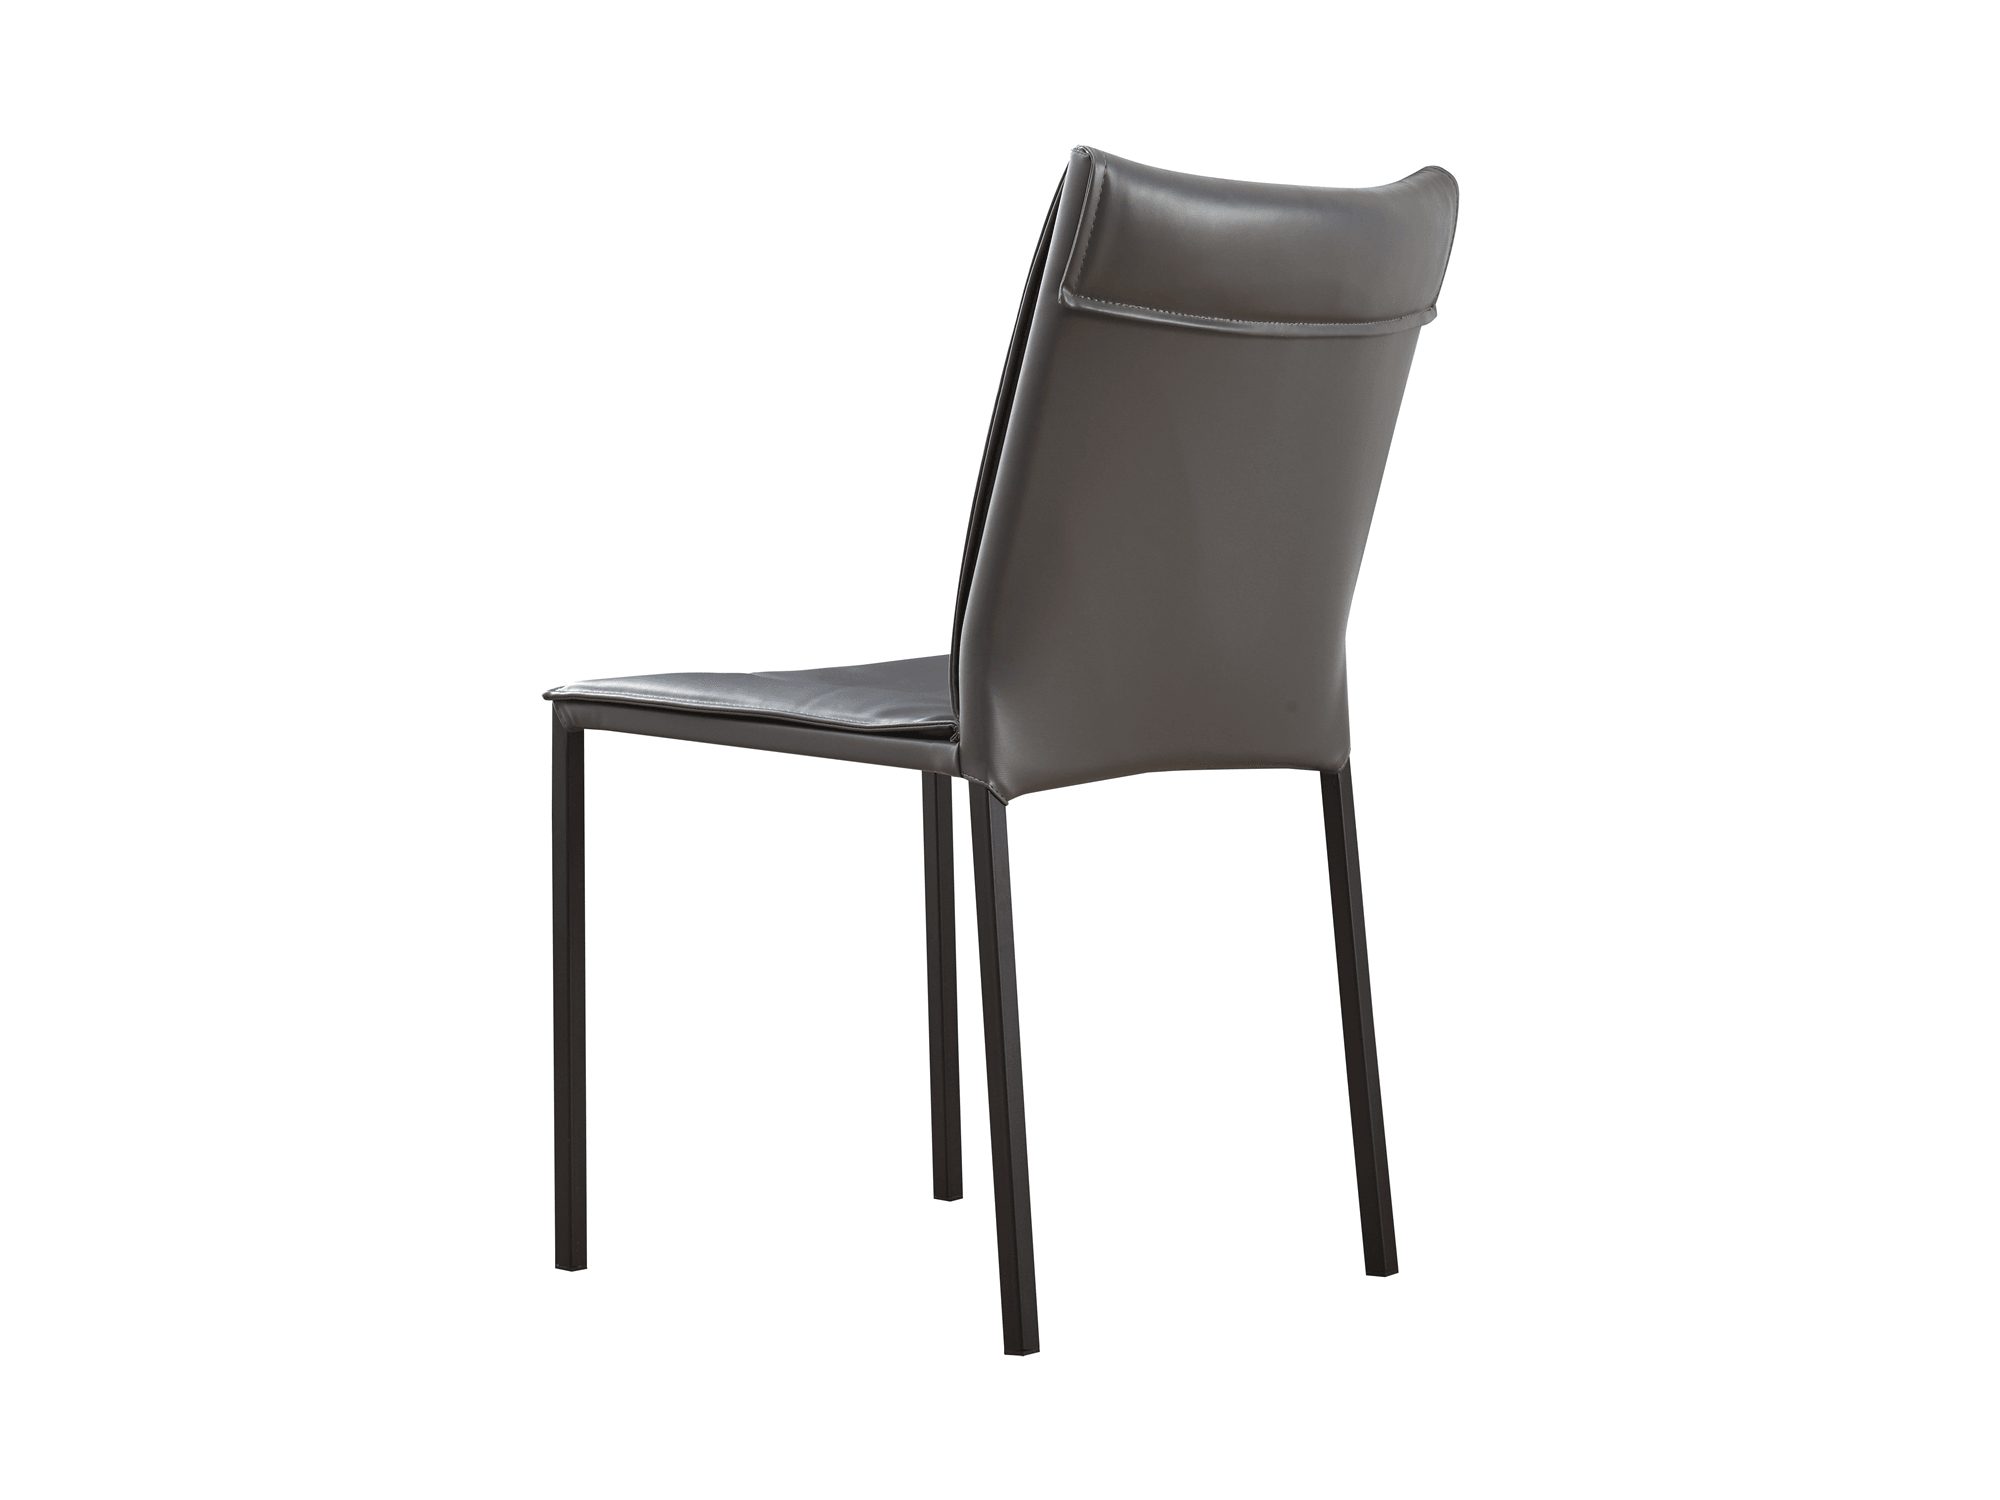 Modernlance Dining Chair in Grey - Euro Living Furniture